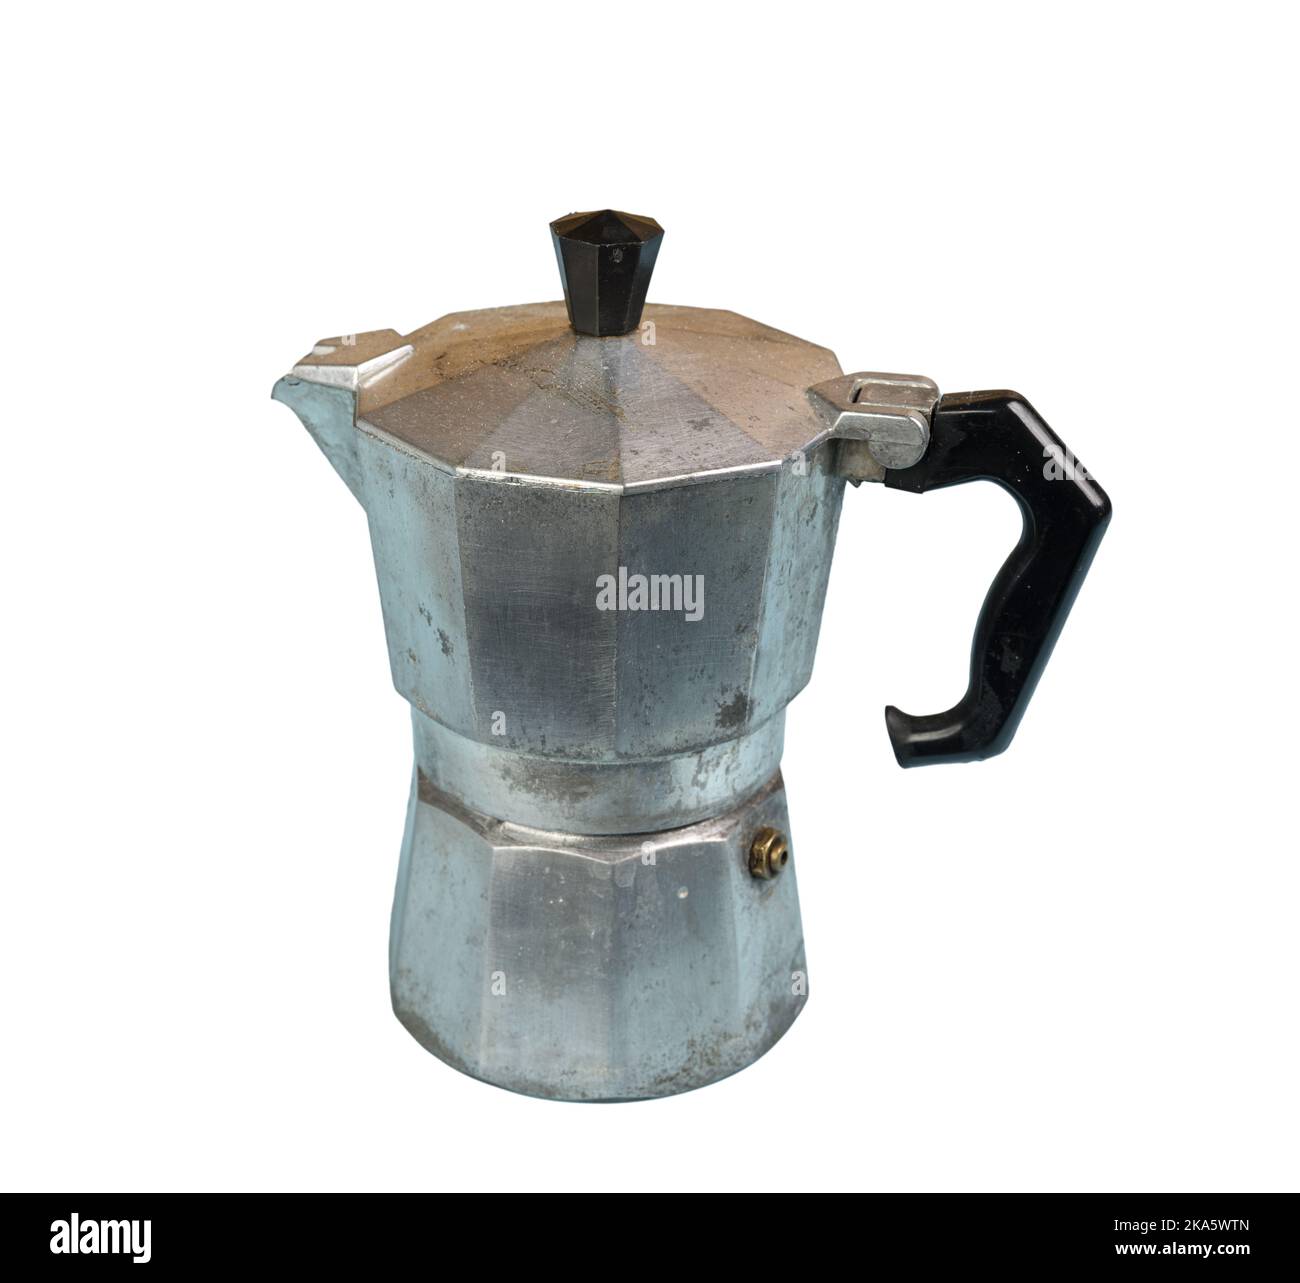 An old aluminum coffee pot in a transparent background Stock Photo